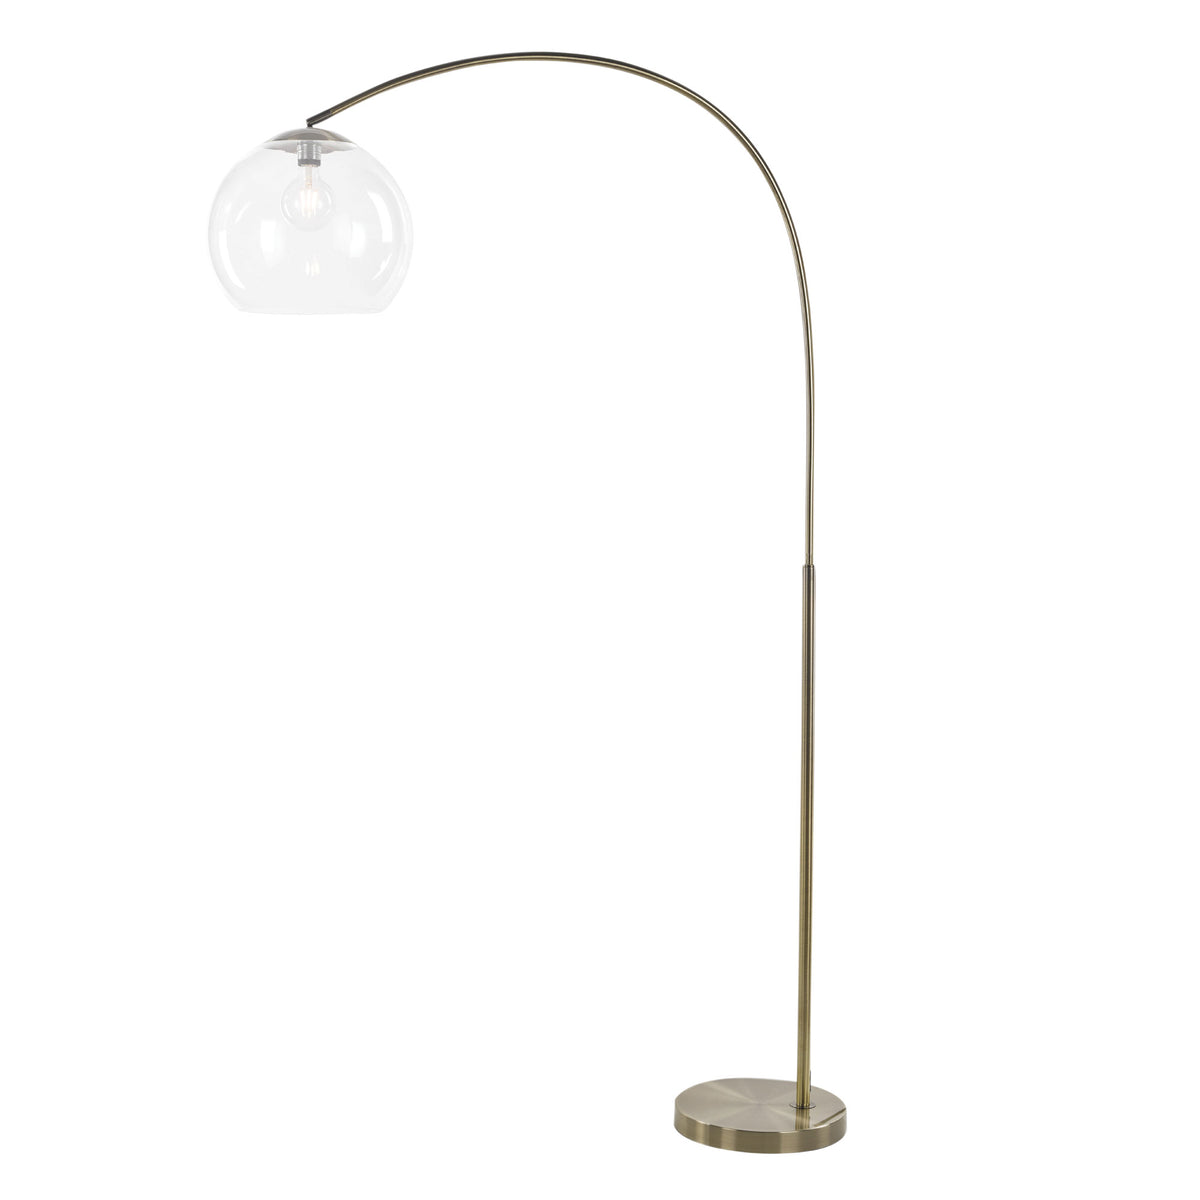 ARCH Lamp Antique Brass And Acrylic Shade